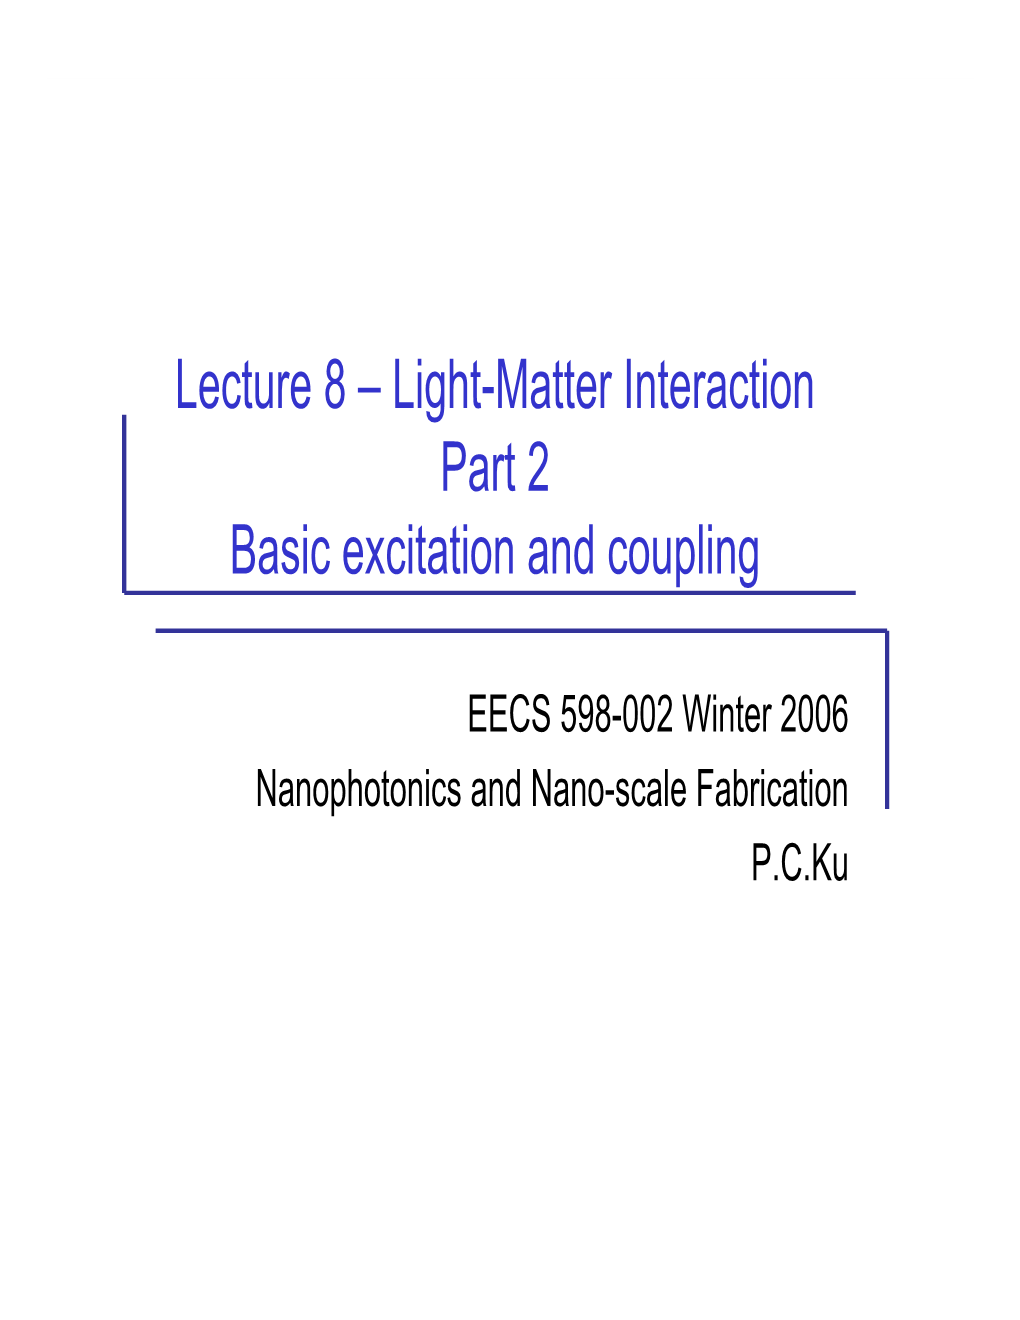 Lecture 8 – Light-Matter Interaction Part 2 Basic Excitation and Coupling